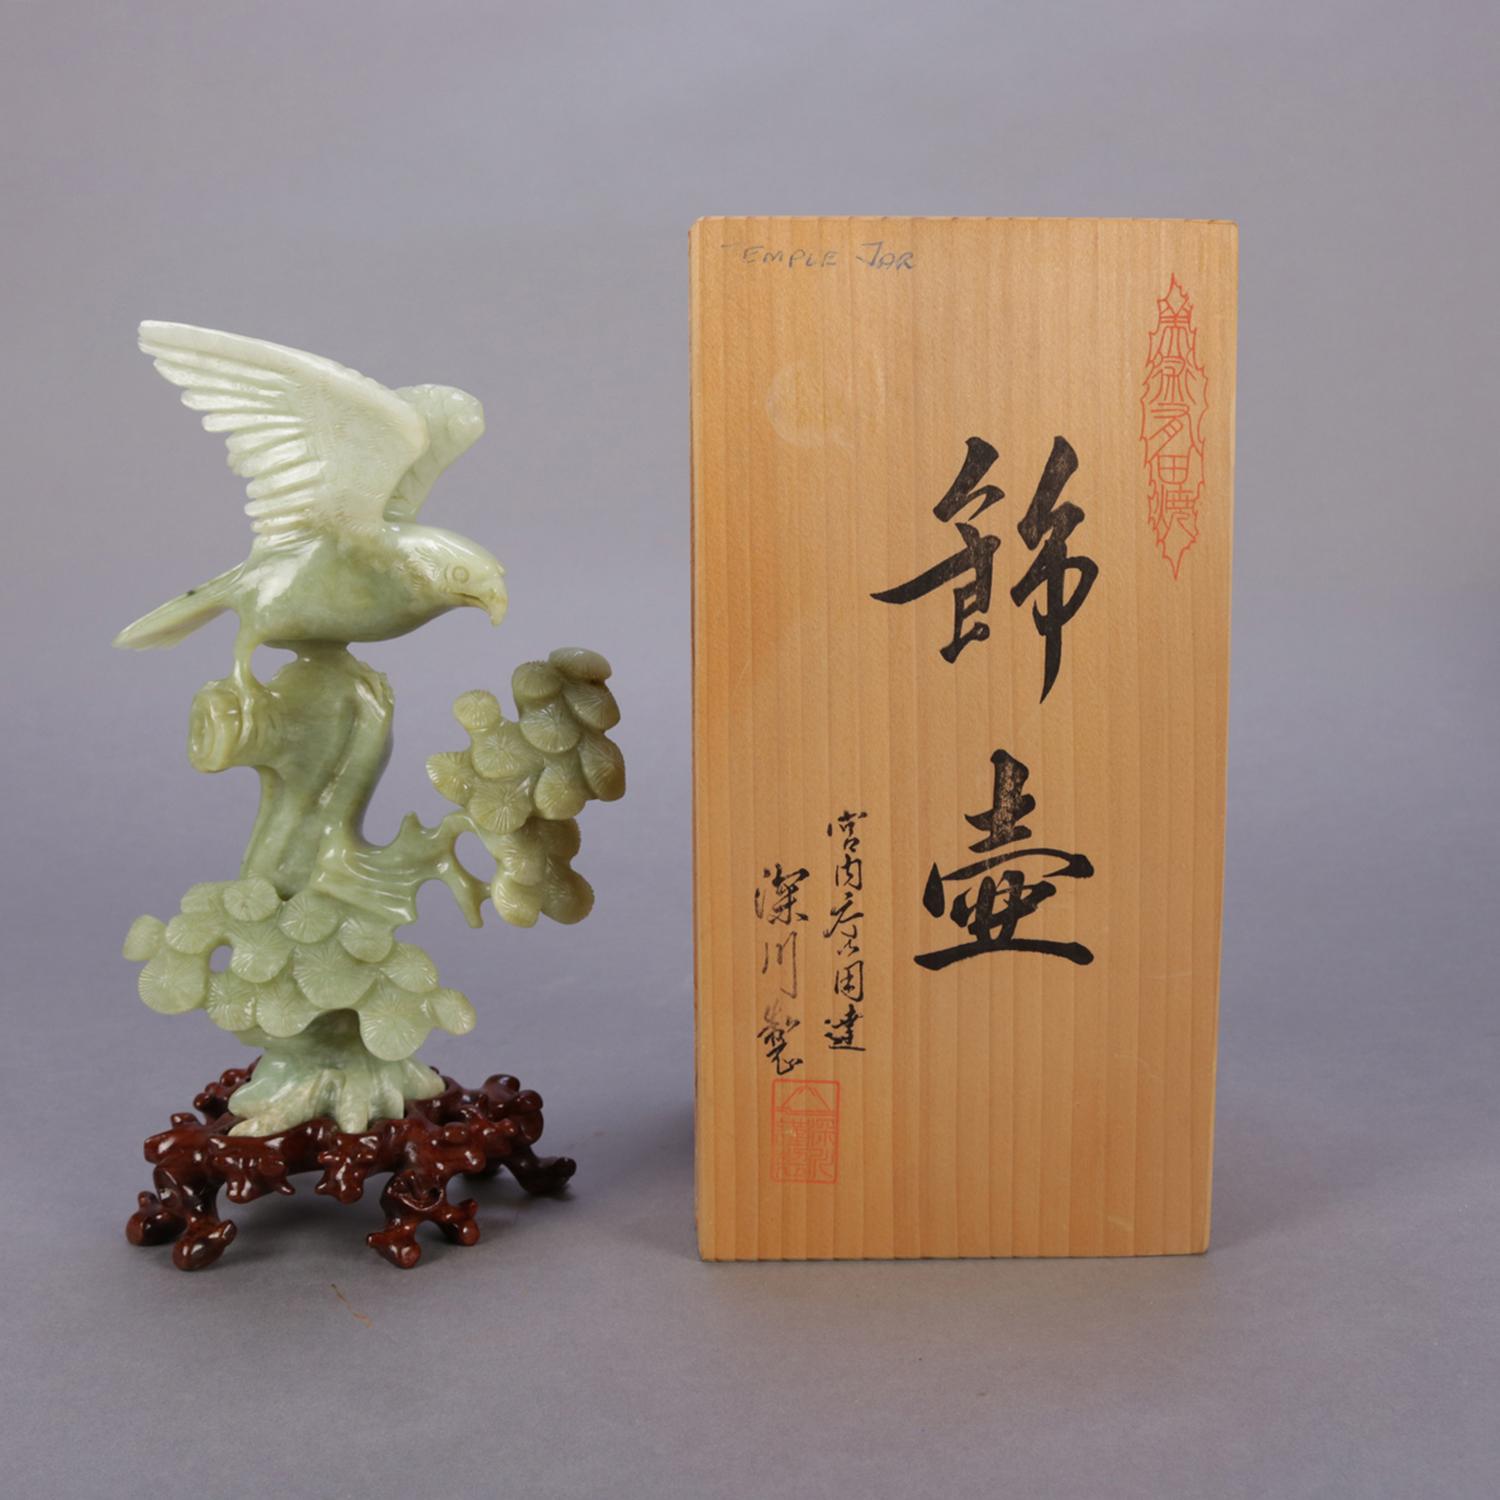 Chinese carved jade figural sculpture of spread eagle hawk (bird) on tree branch and seated on carved hardwood stand, original box, 20th century.

Measures: Box 9.5